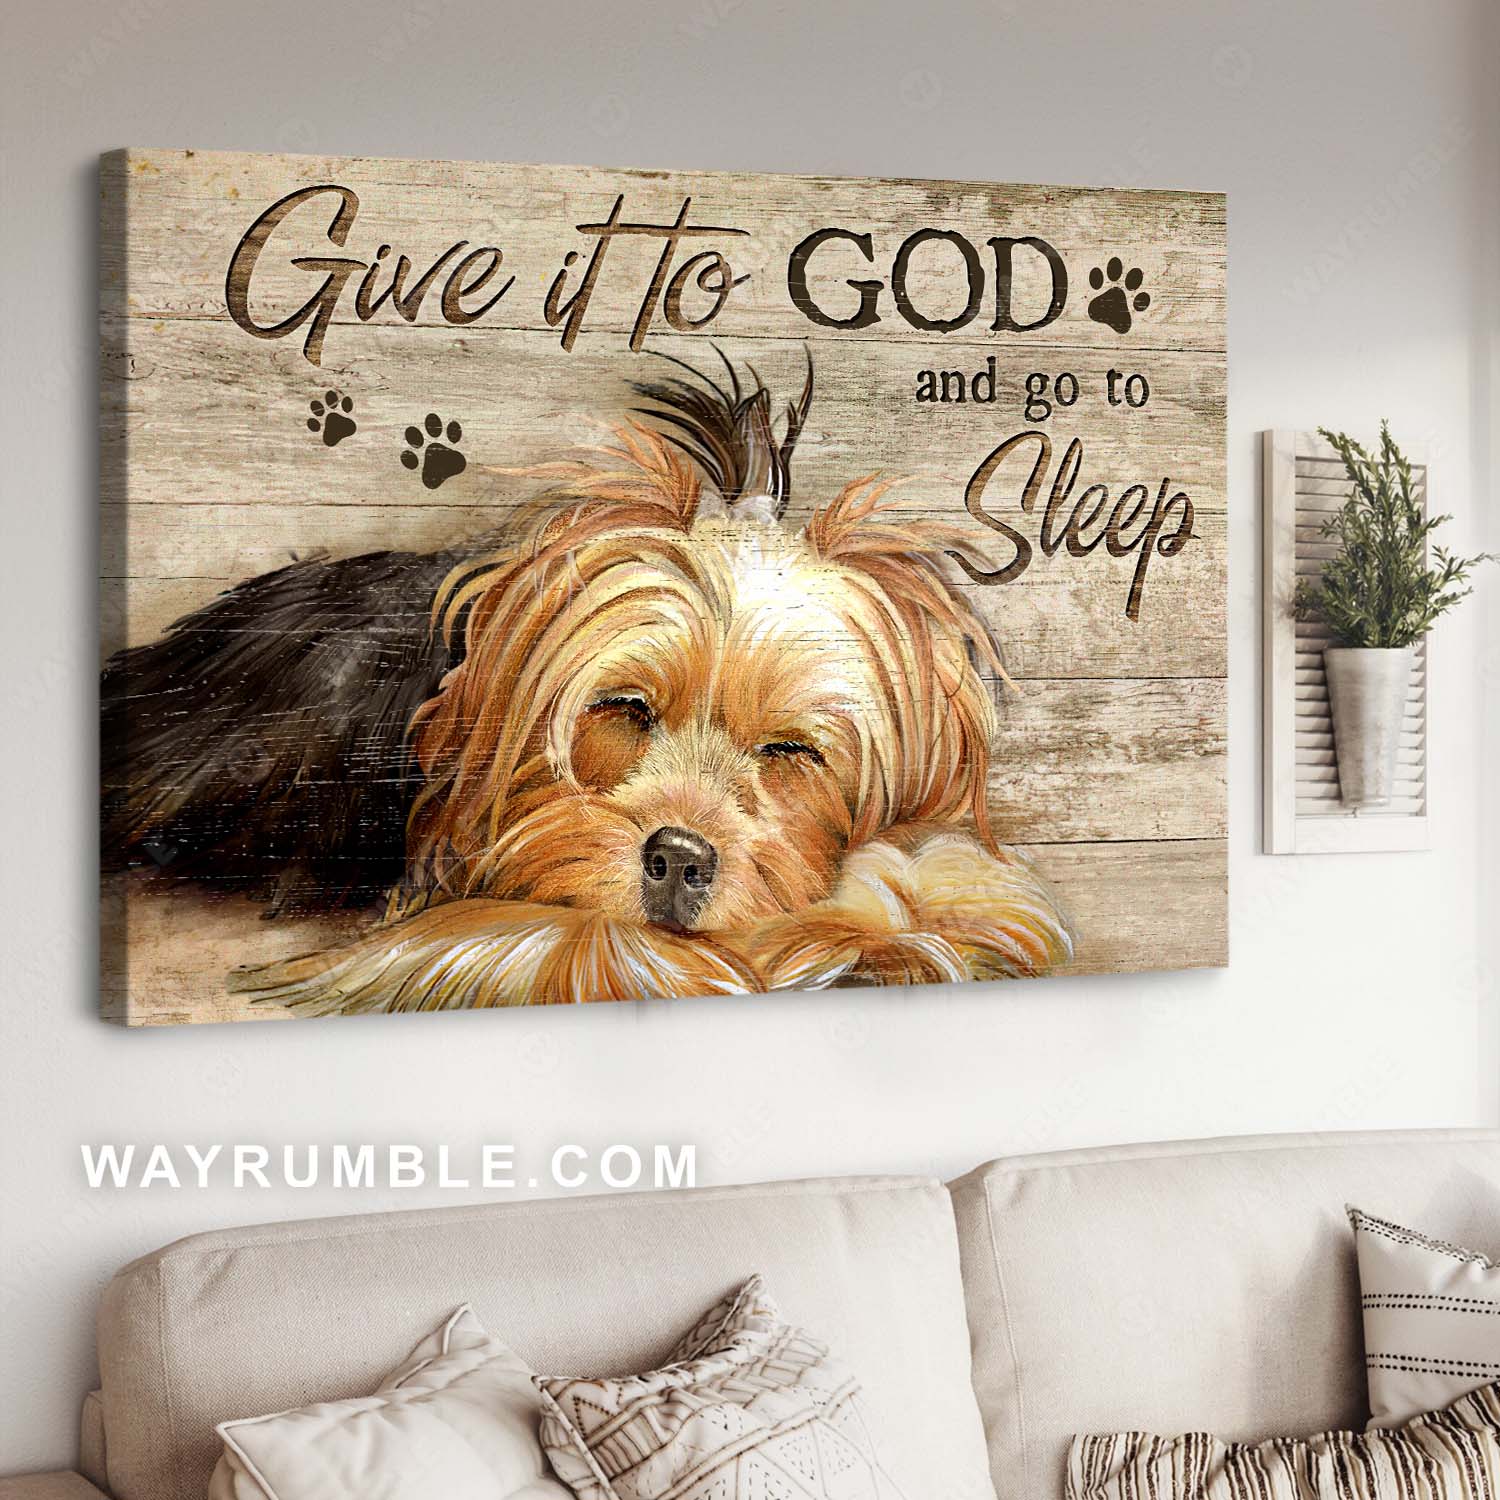 Lovely Yorkshire Terrier, Dog lover, Pet portrait, Give it to God and go to sleep - Jesus Landscape Canvas Prints, Home Decor Wall Art